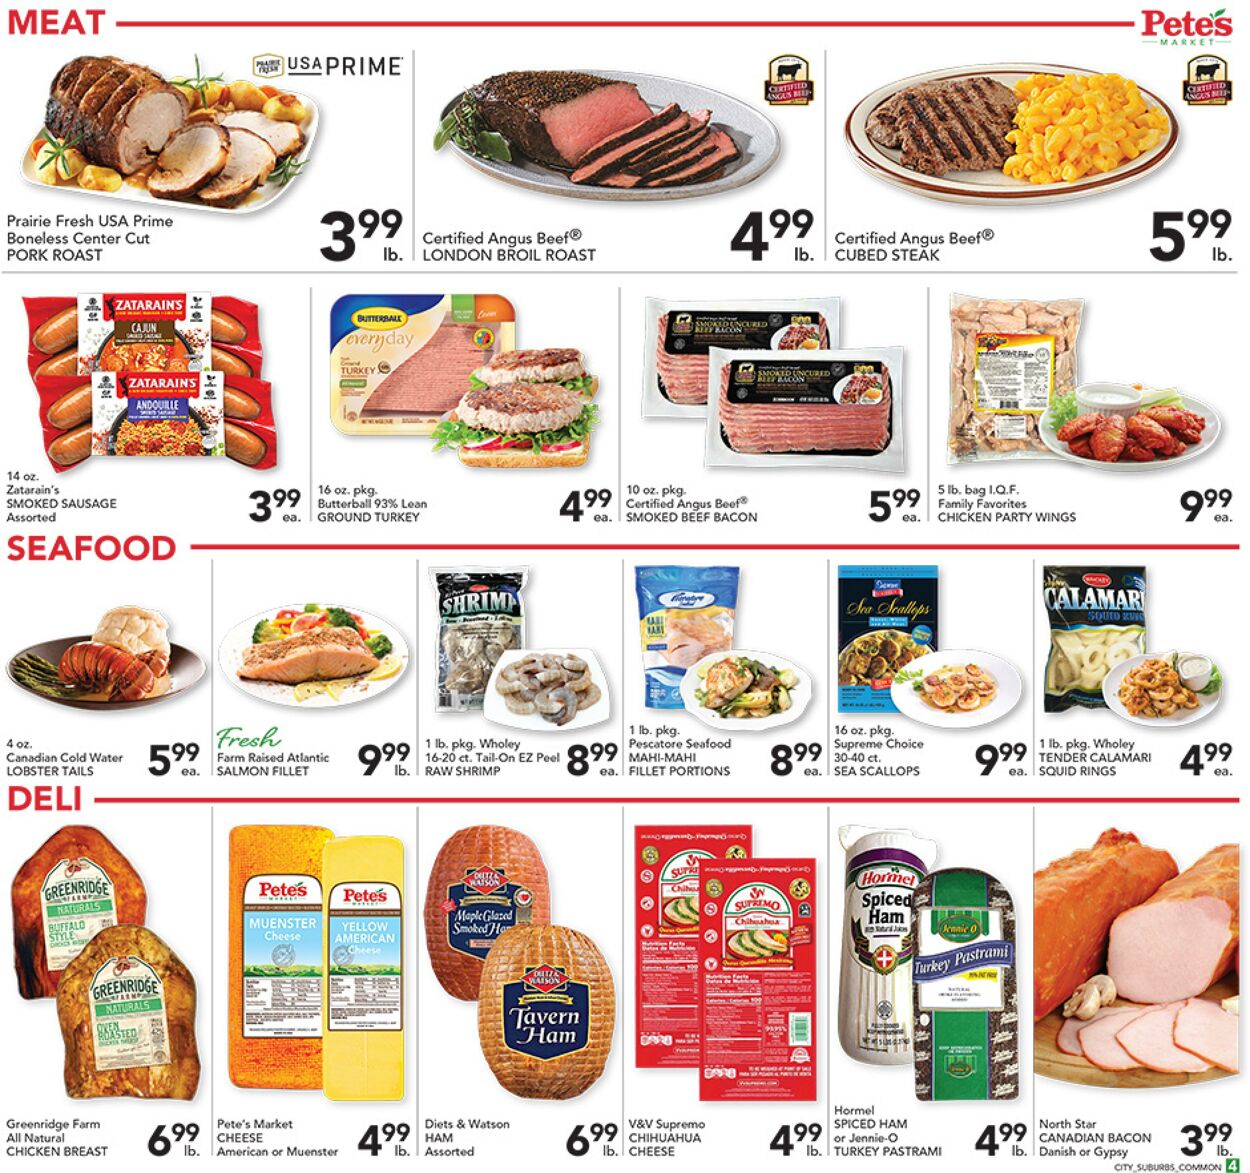 Weekly ad Pete's Fresh Market 10/12/2022 - 10/18/2022